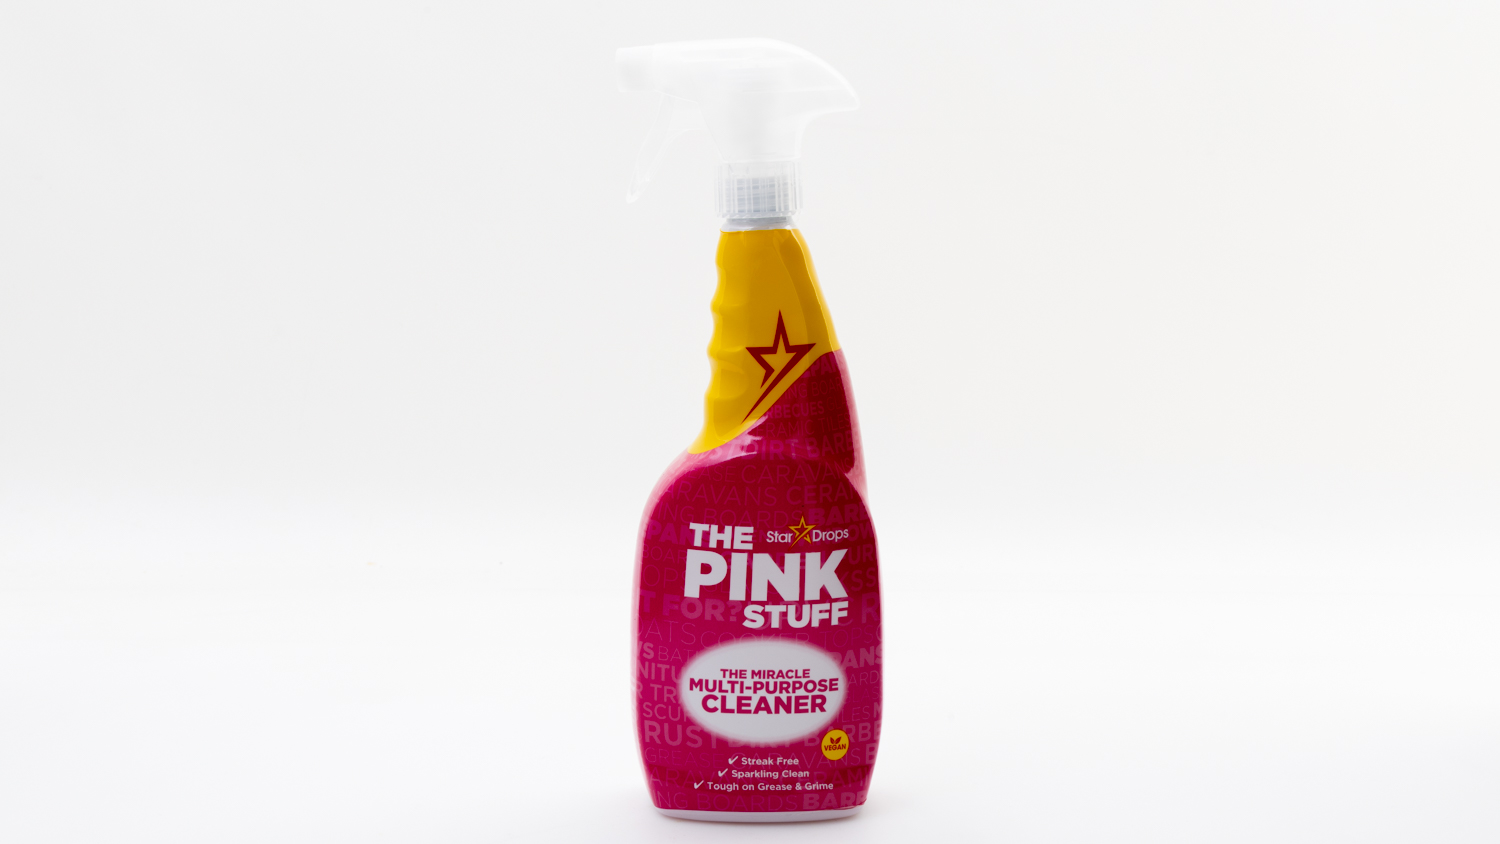 The Pink Stuff The Miracle Multi-Purpose Cleaner carousel image